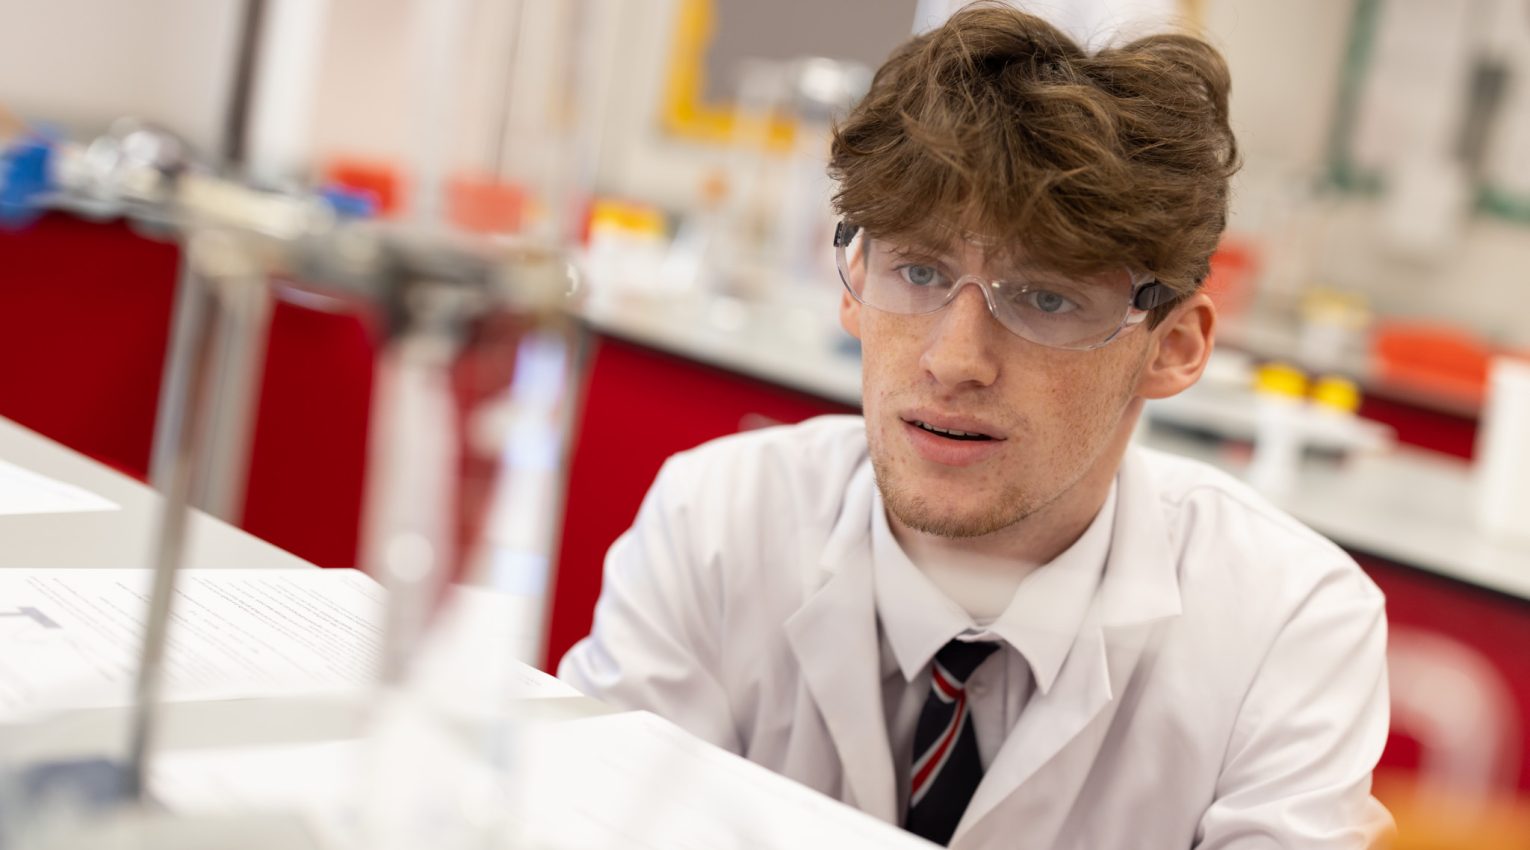 Wetherby Senior sixth former in a science lesson